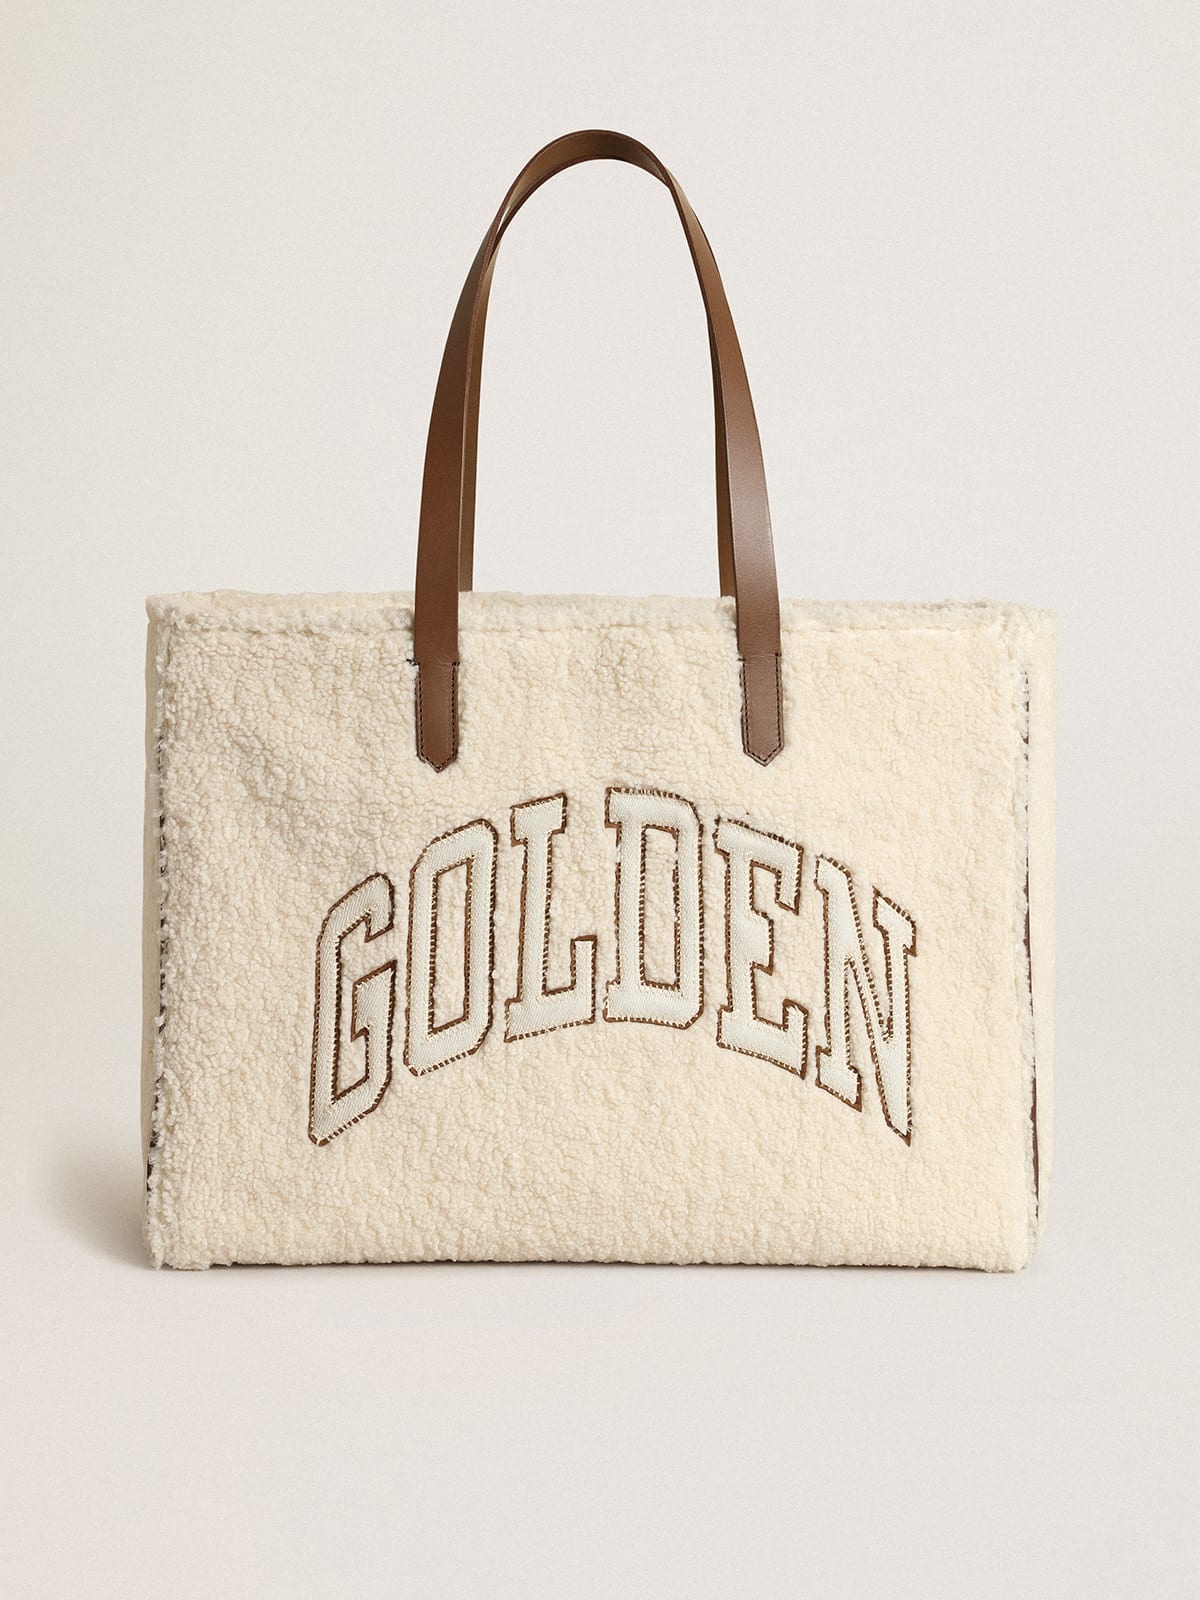 East-West California Bag in white faux fur with Golden lettering and contrasting handles - 1